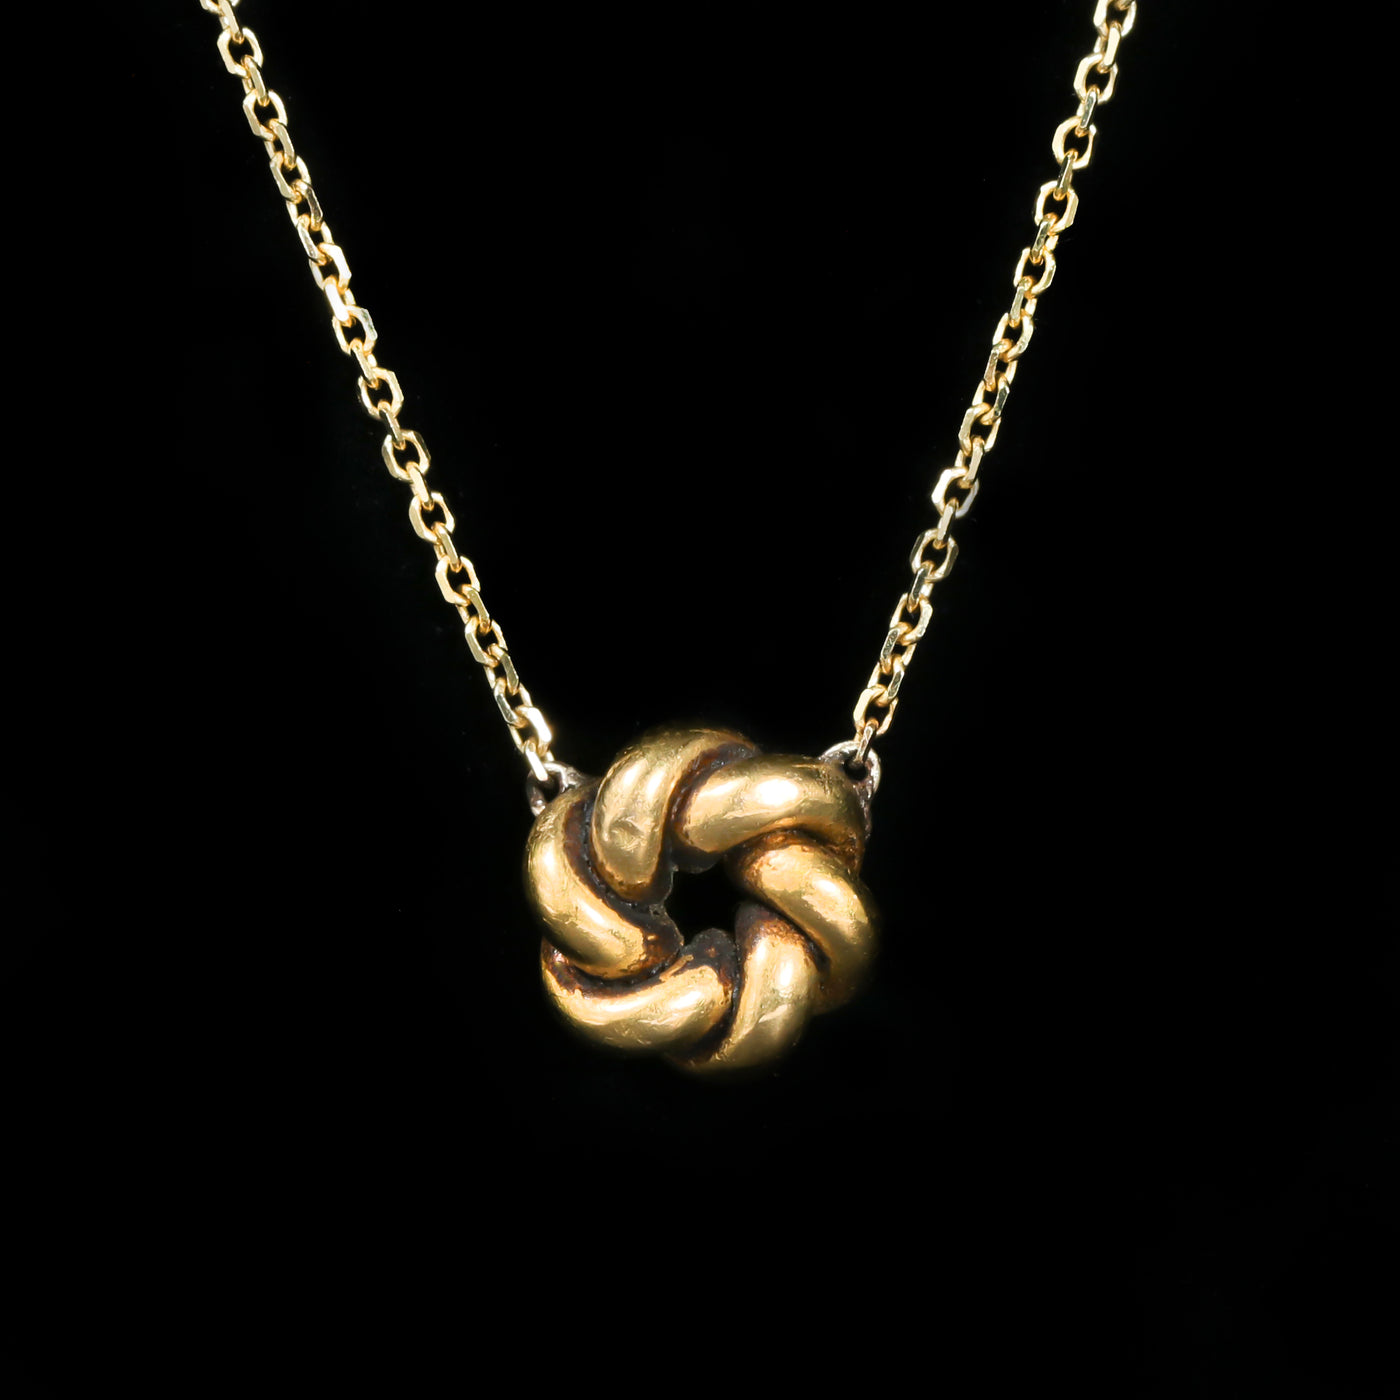 Victorian Lover's Knot Necklace